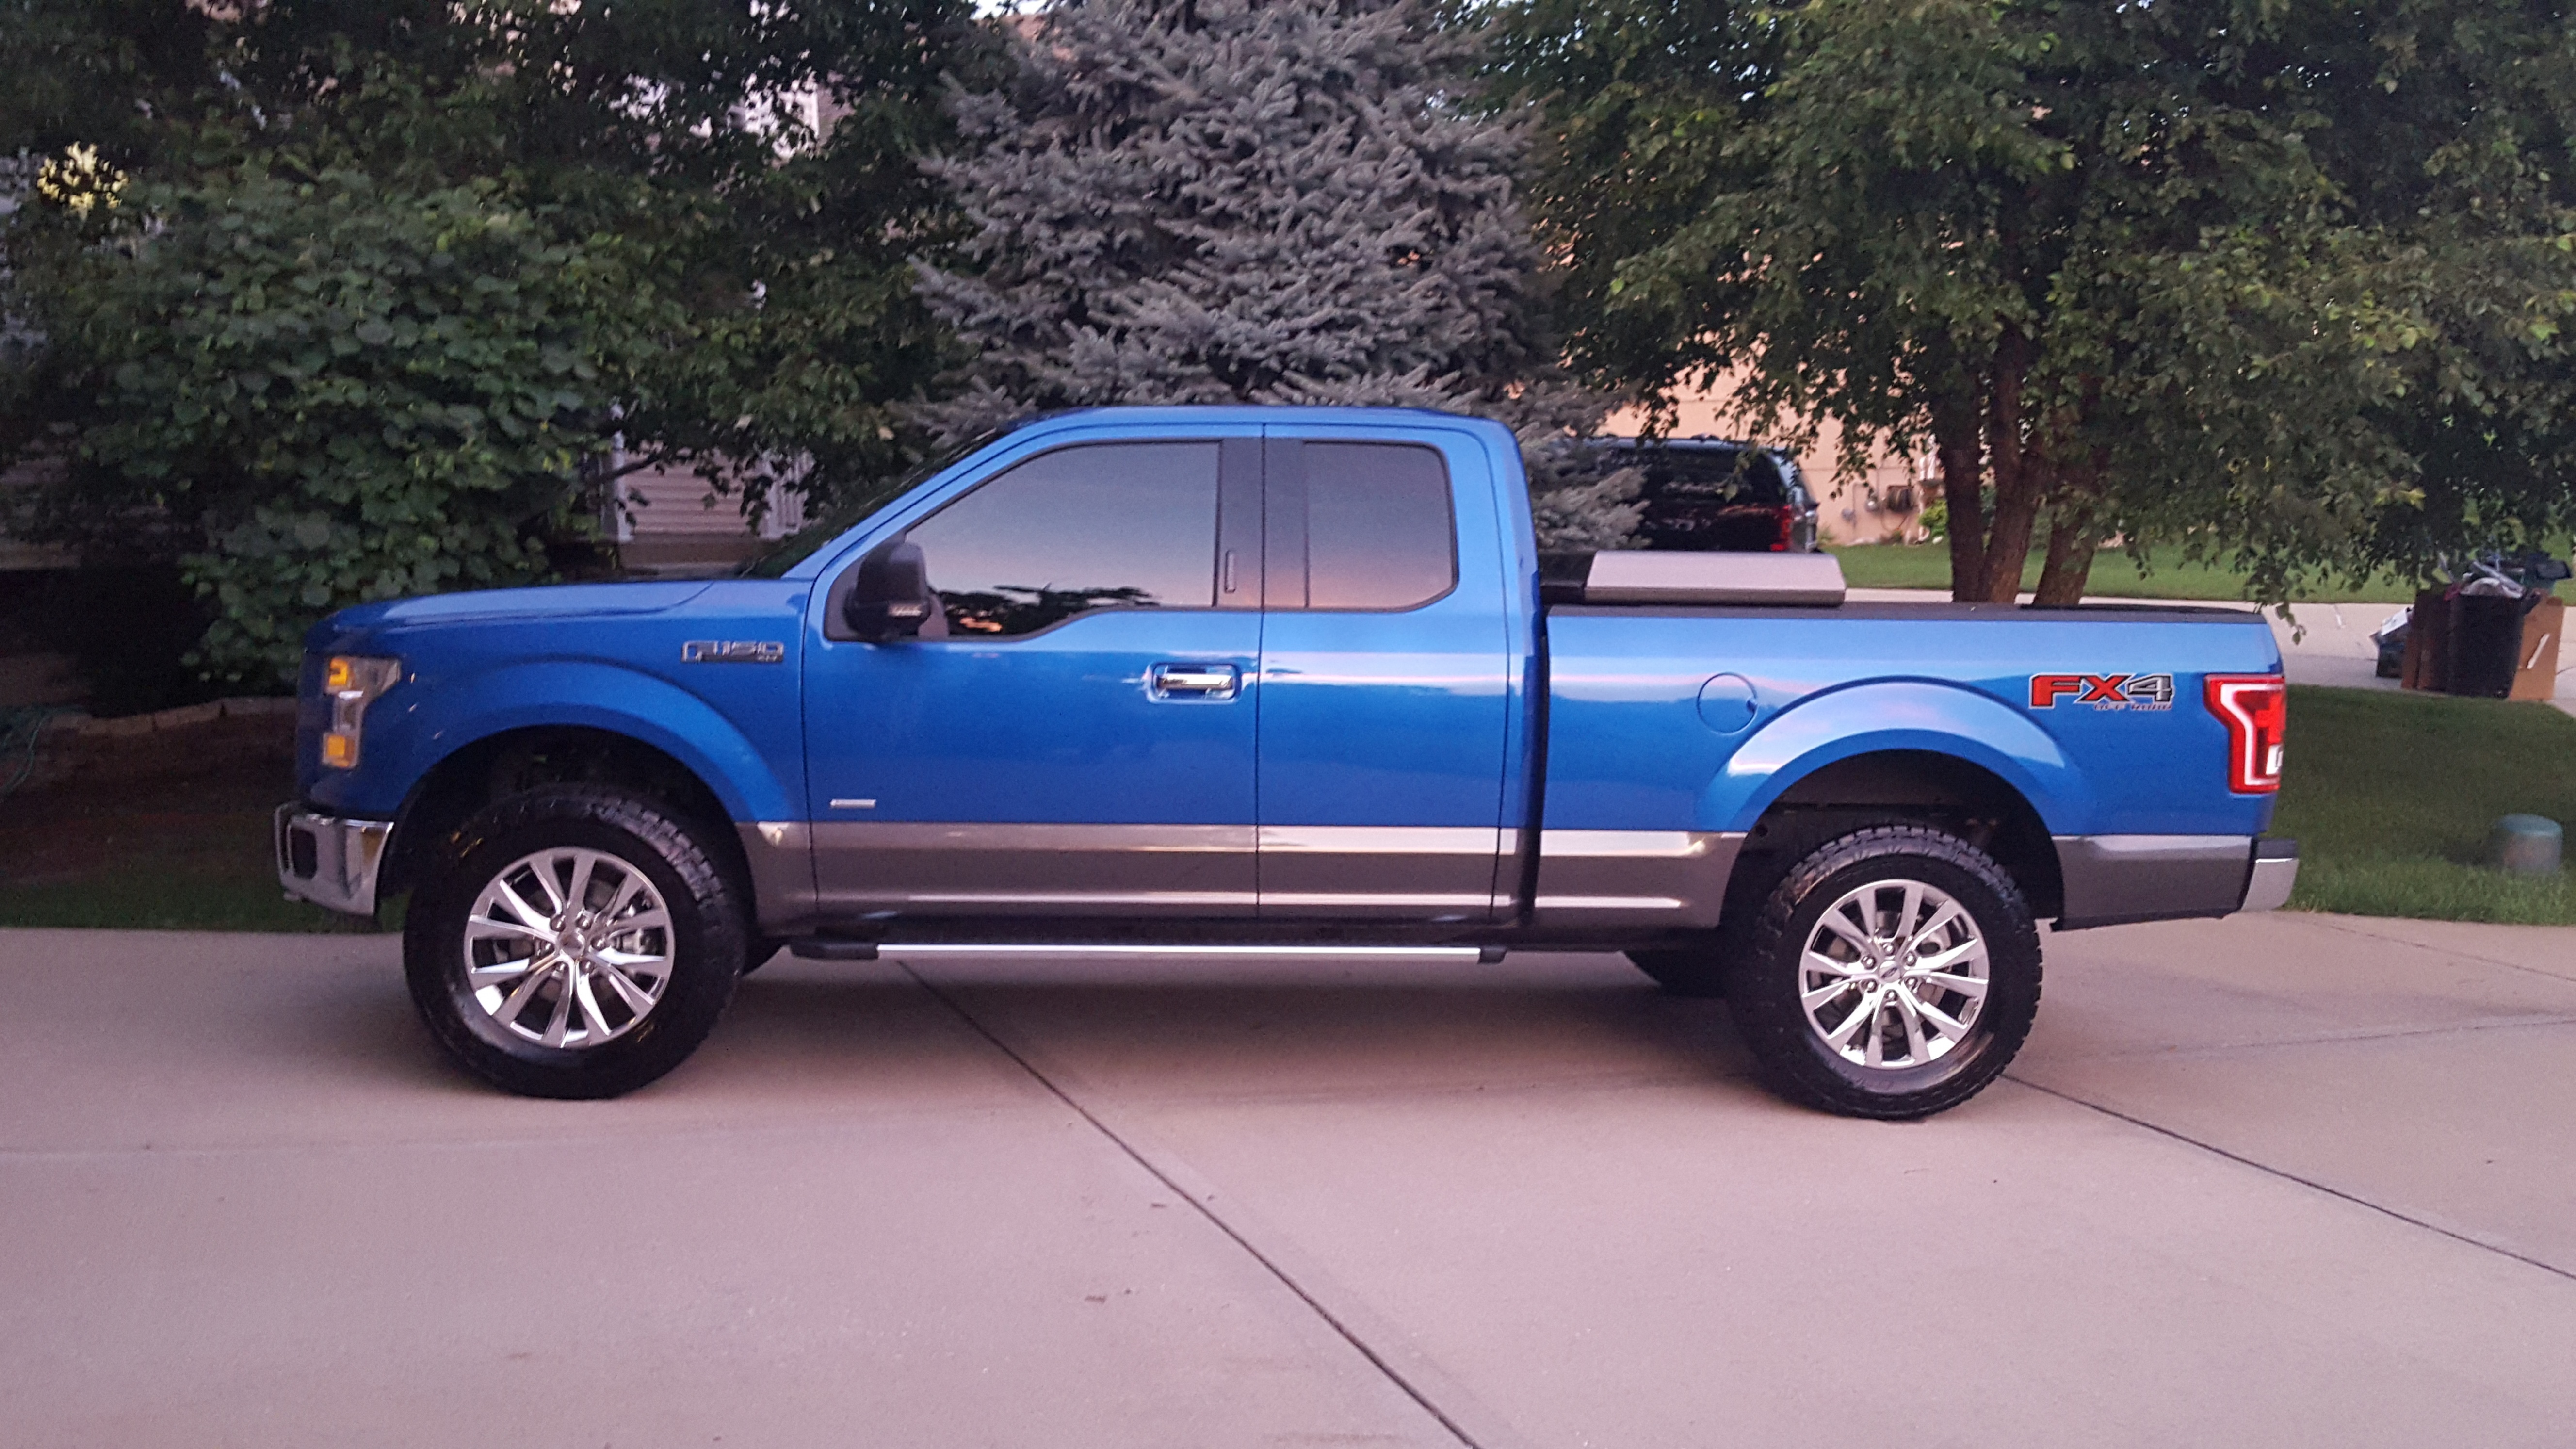 Two Tone colours Page 7 Ford F150 Forum Community of Ford Truck Fans